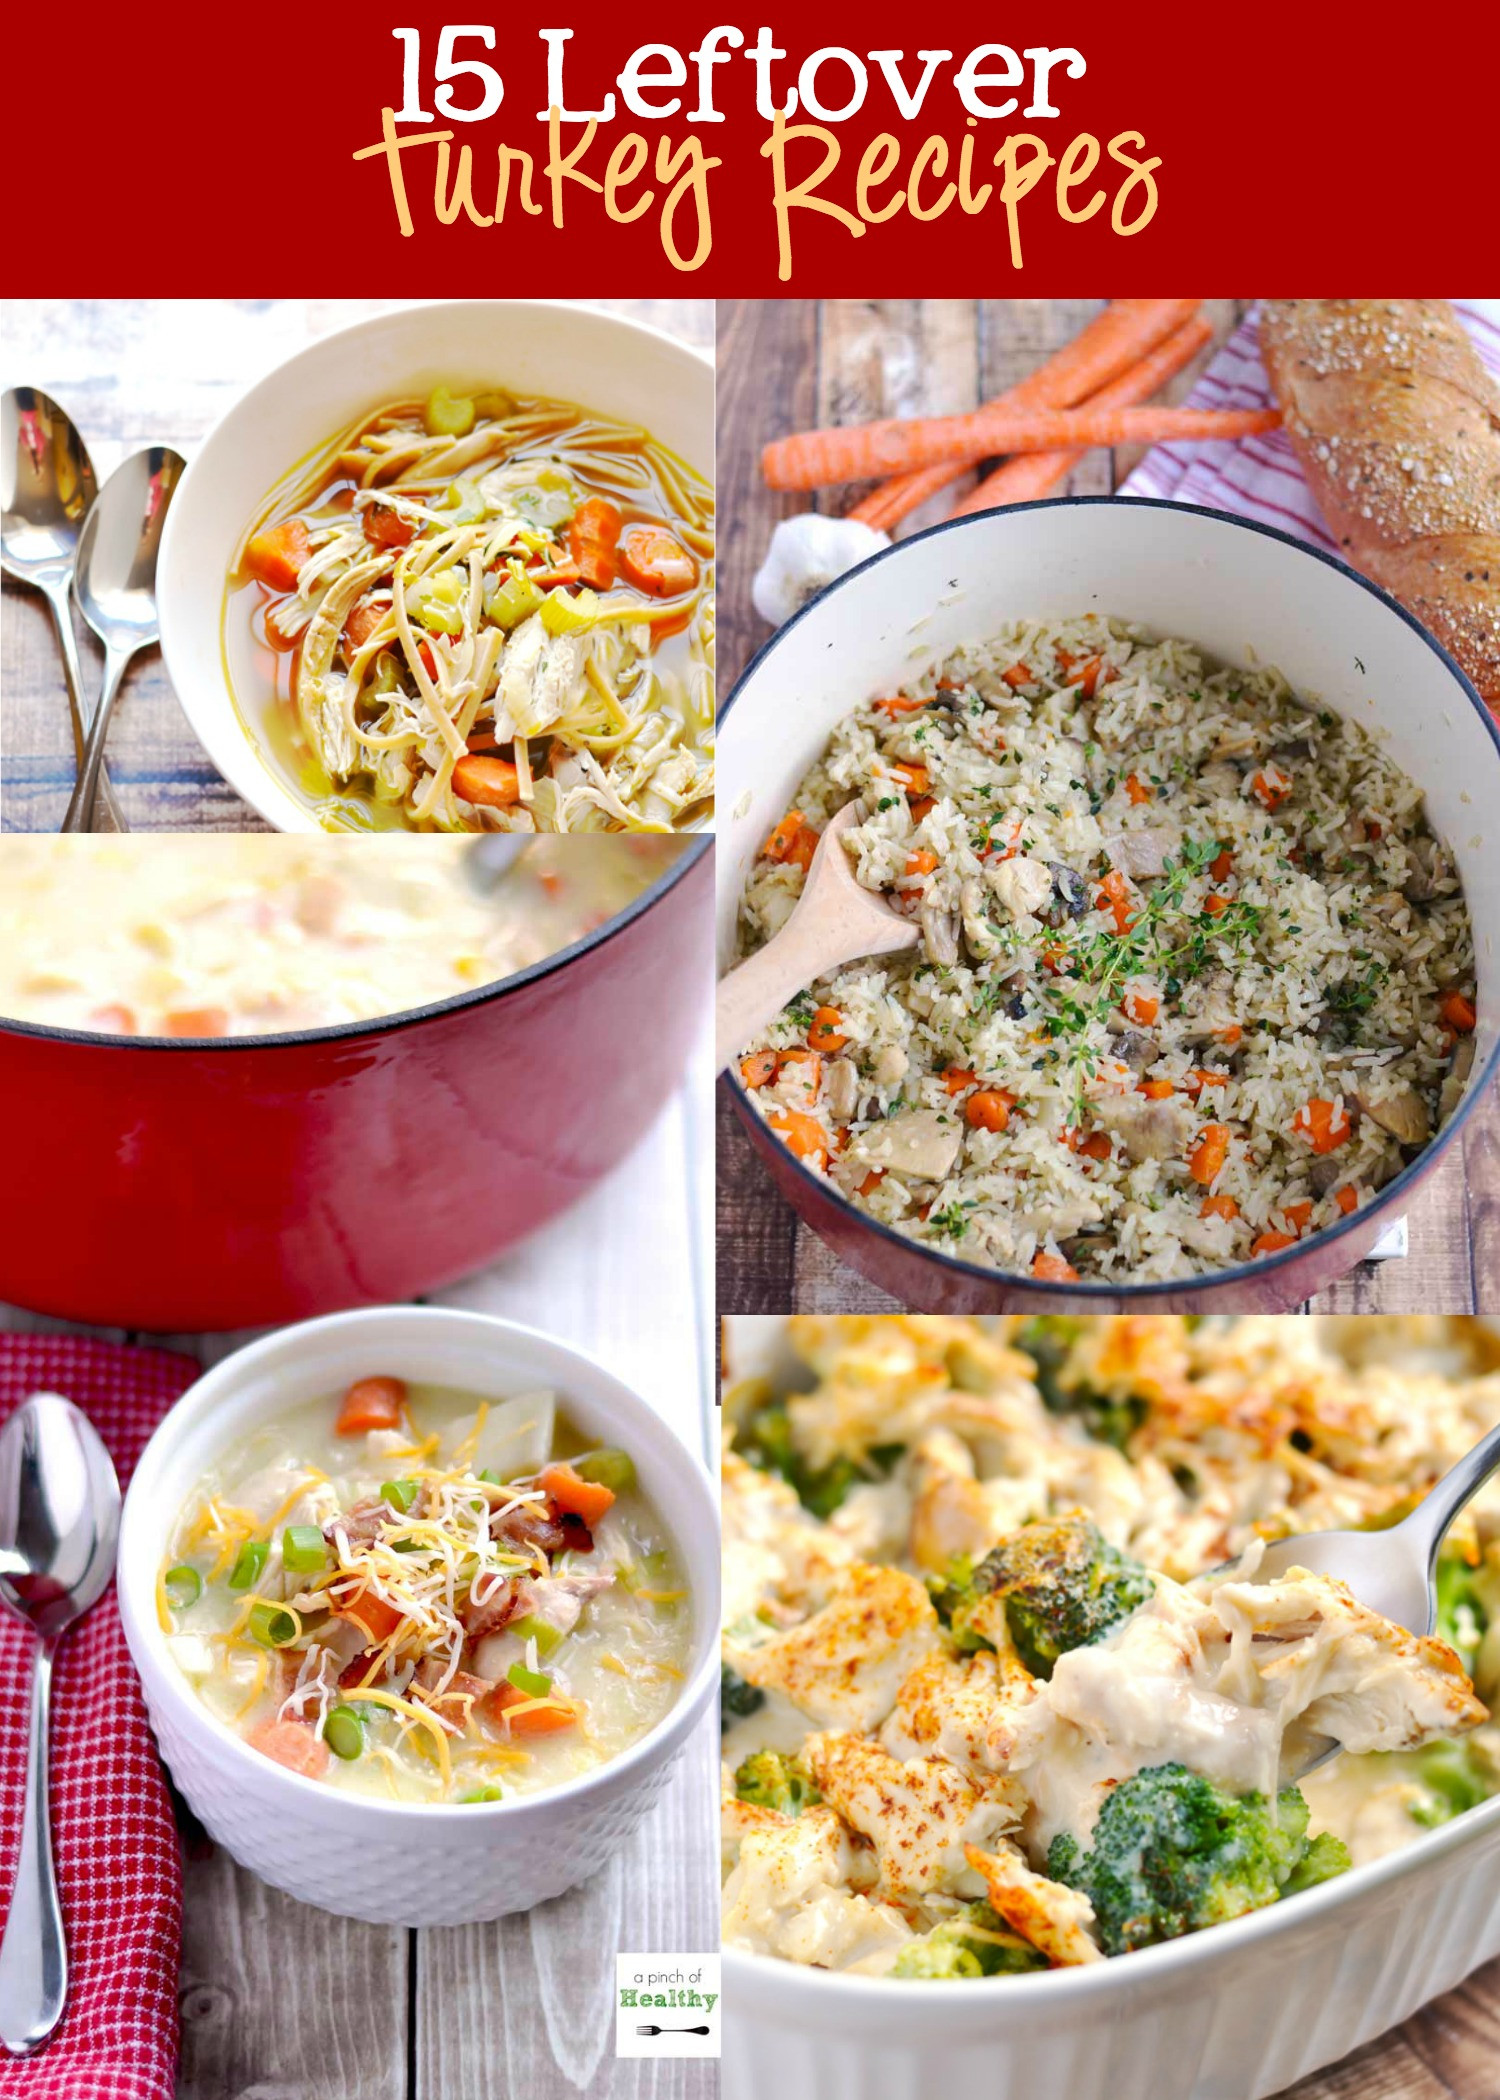 Leftover Thanksgiving Turkey Recipes
 Leftover Turkey Recipes Roundup A Pinch of Healthy